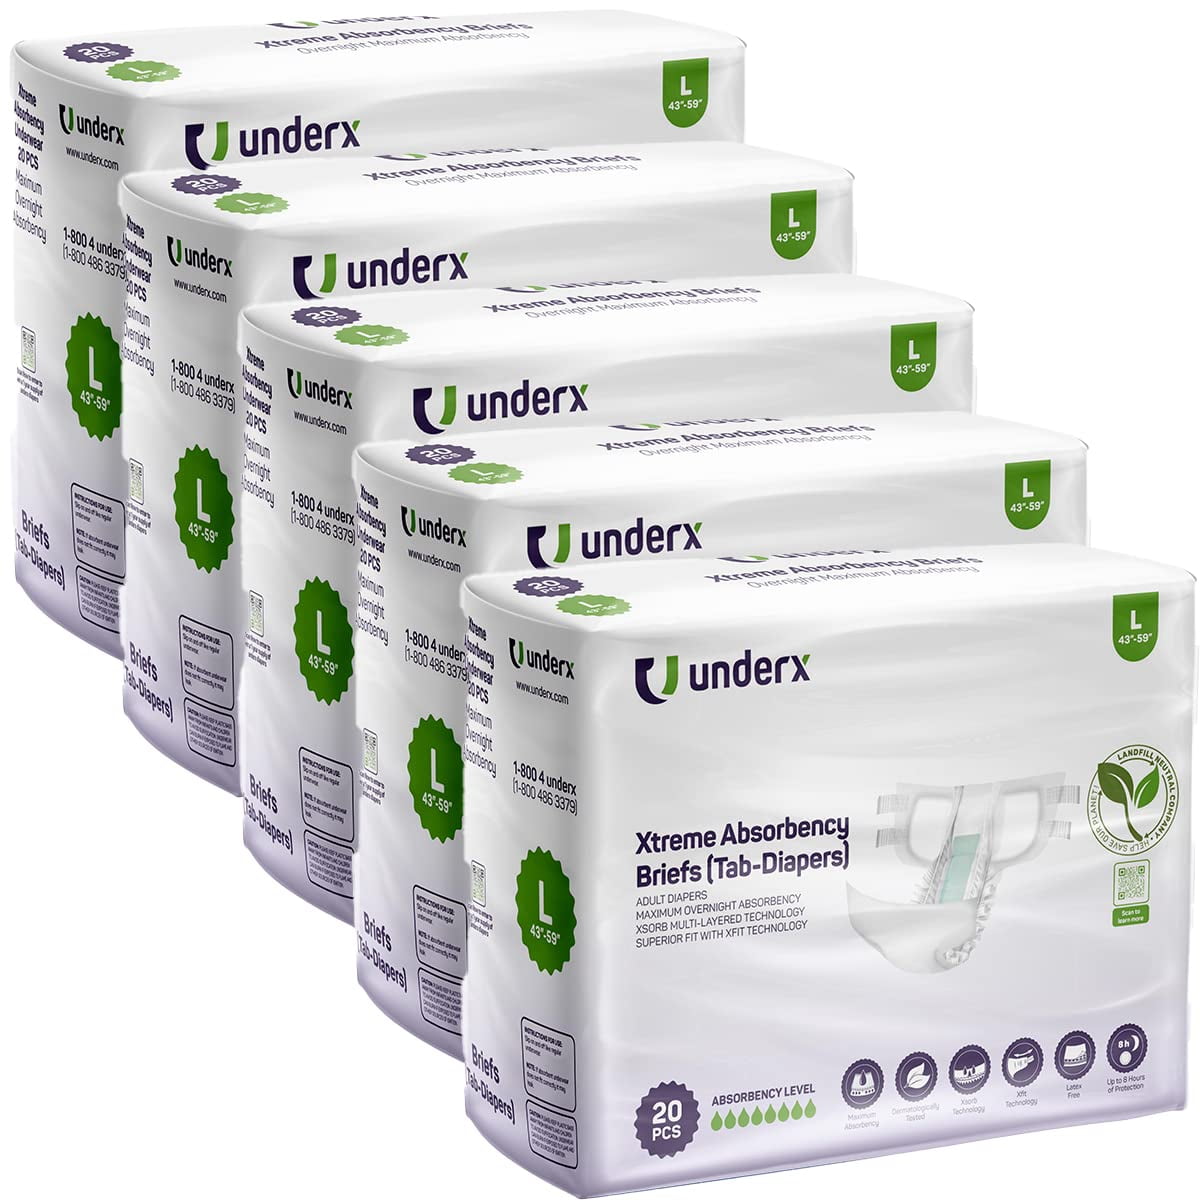 UnderX Tabbed Disposable Briefs for Adult - Overnight Comfort